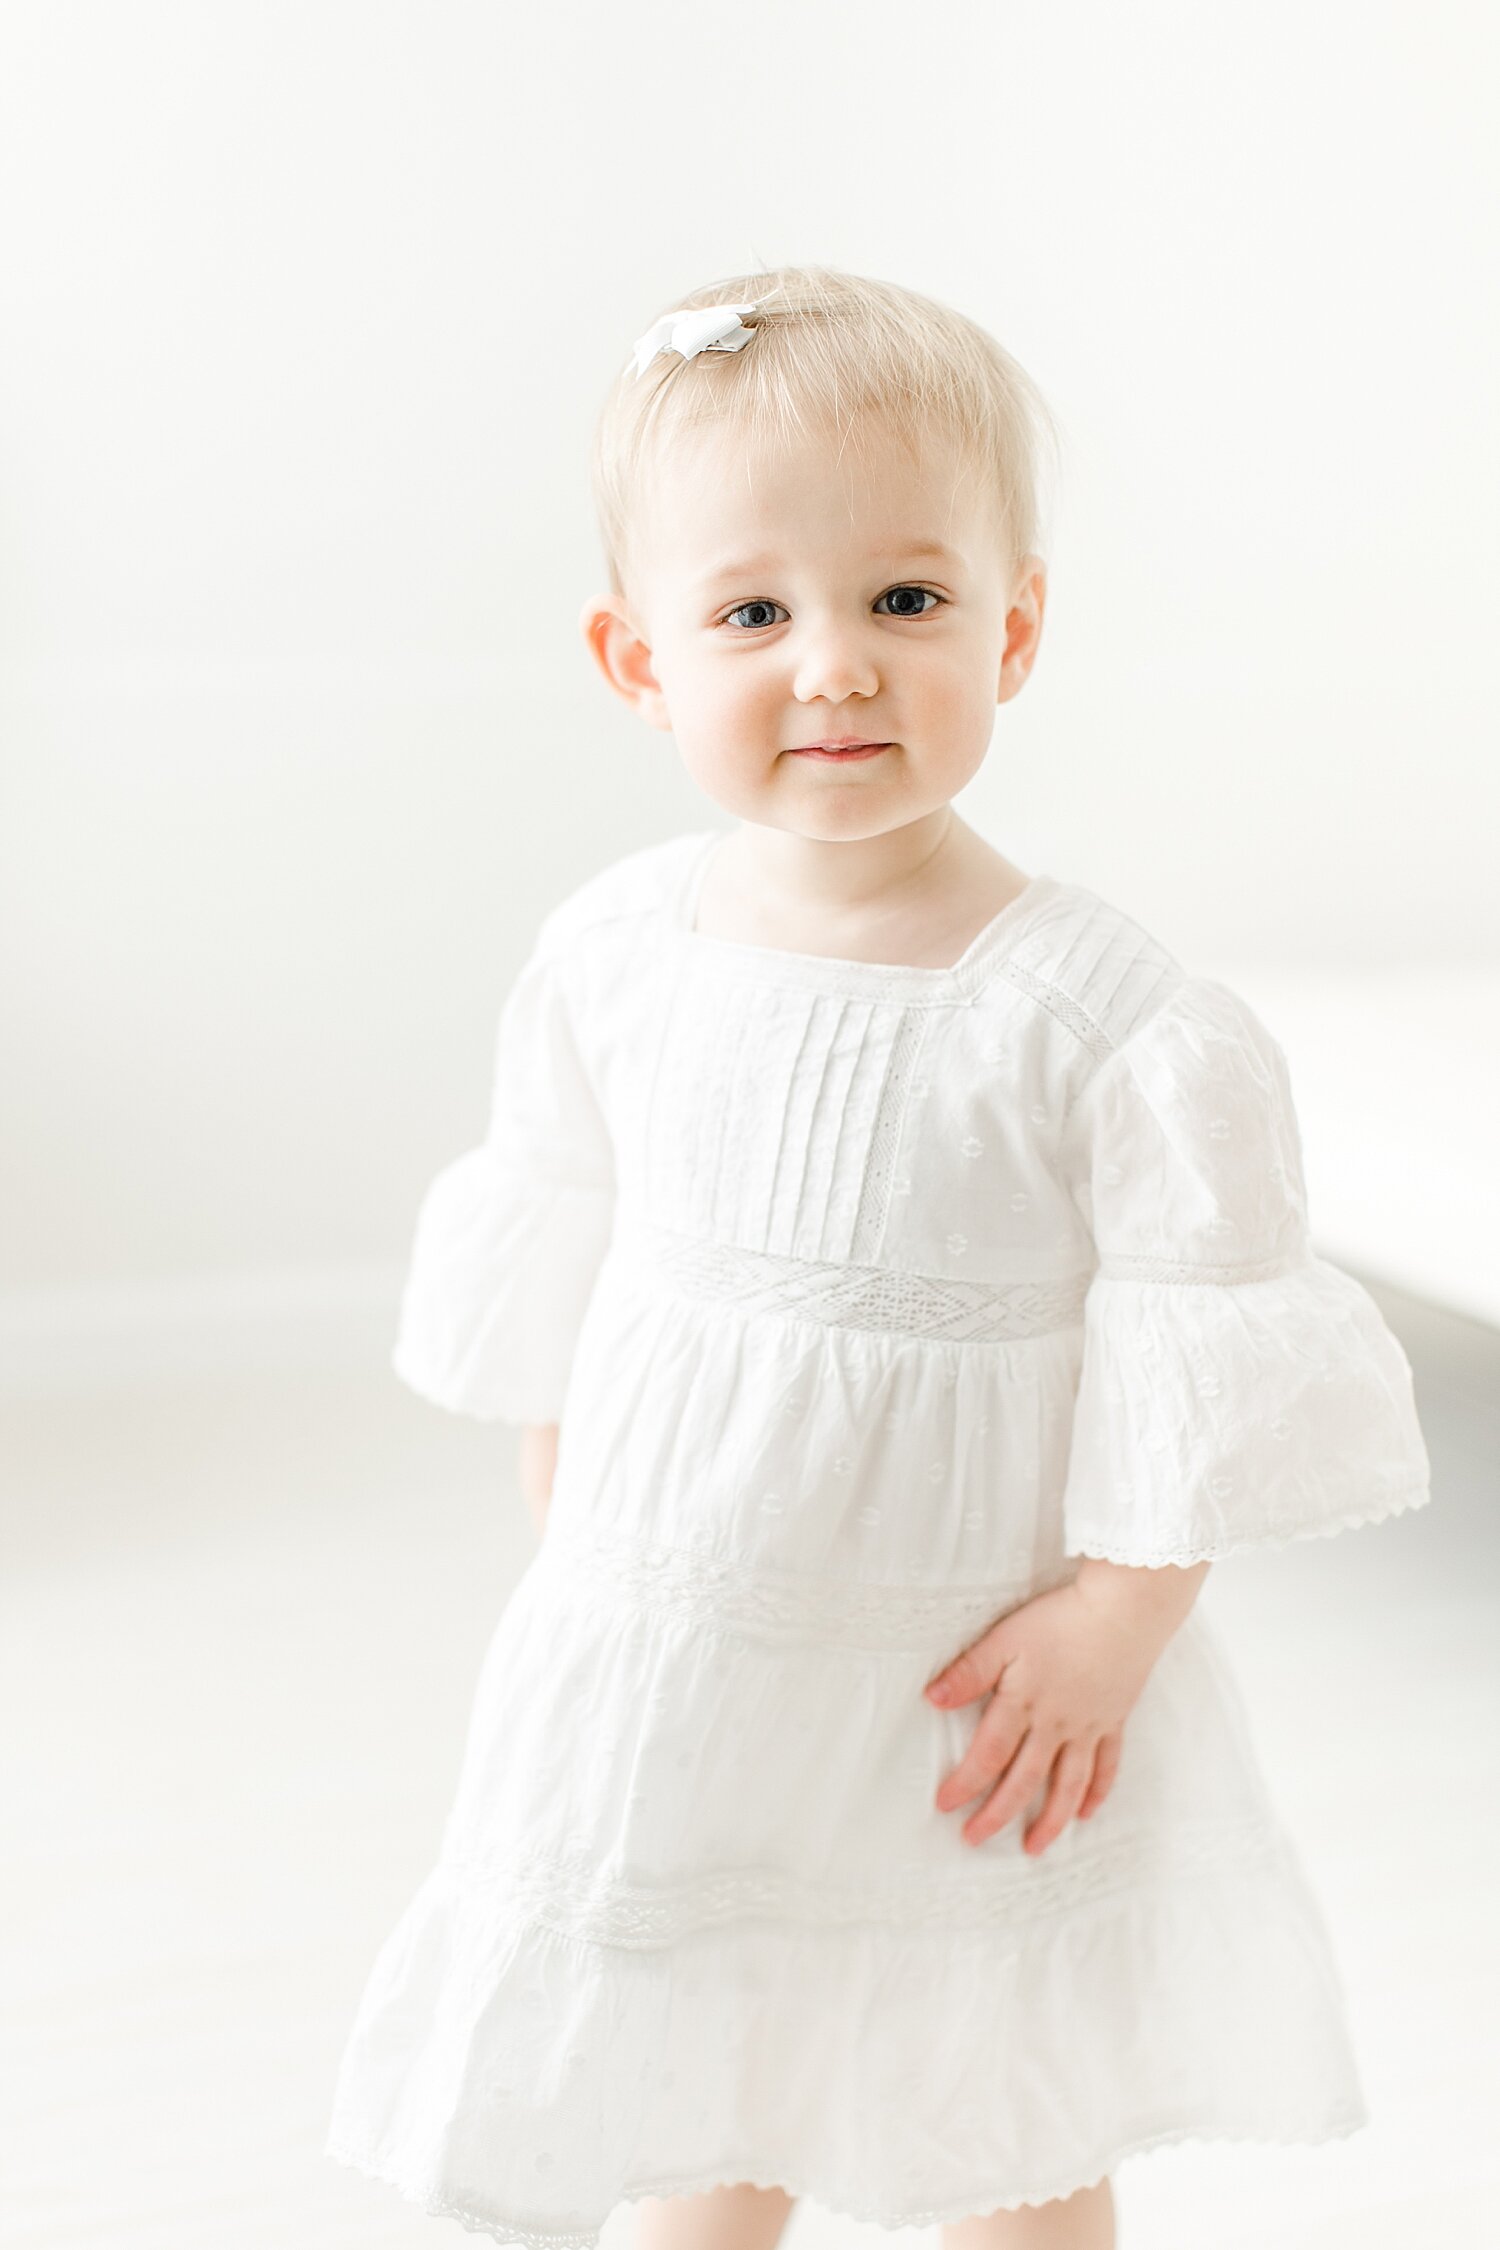 Toddler aged girl standing in beautiful white eyelet dress. Photo by Kristin Wood Photography.